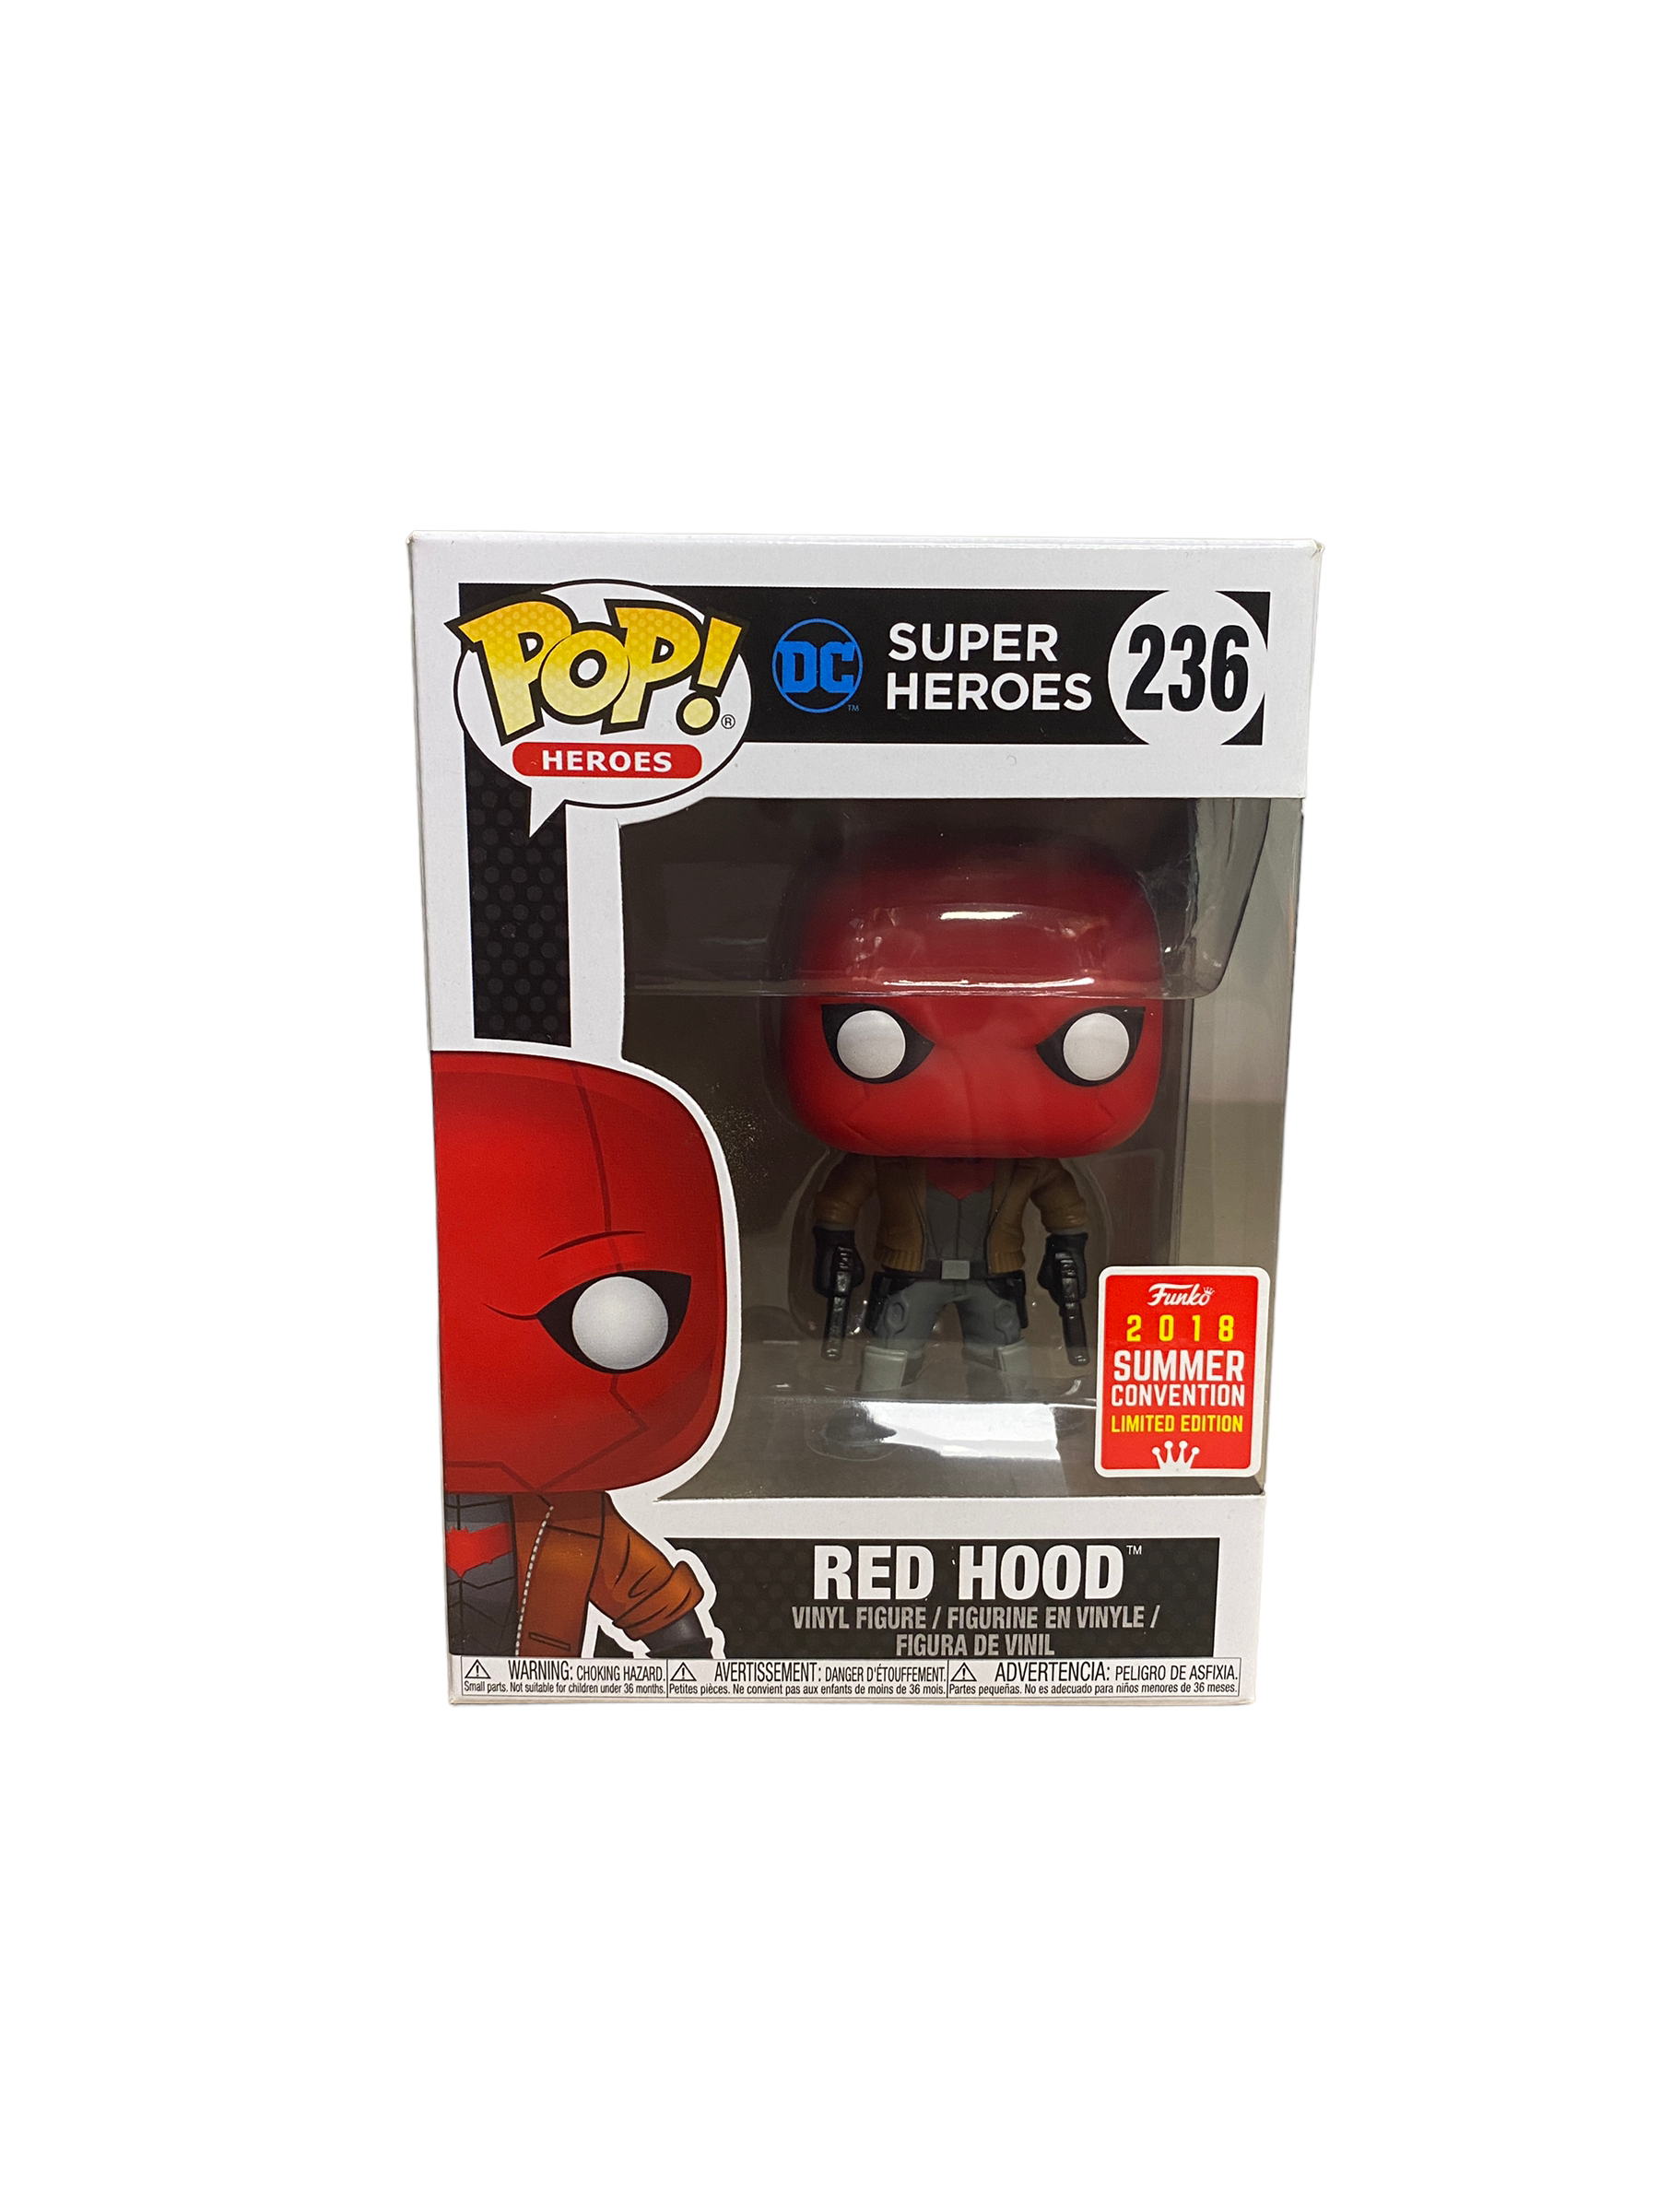 Red Hood #236 Funko Pop! - DC Super Heroes - SDCC 2018 Shared Convention Exclusive - Condition 9/10